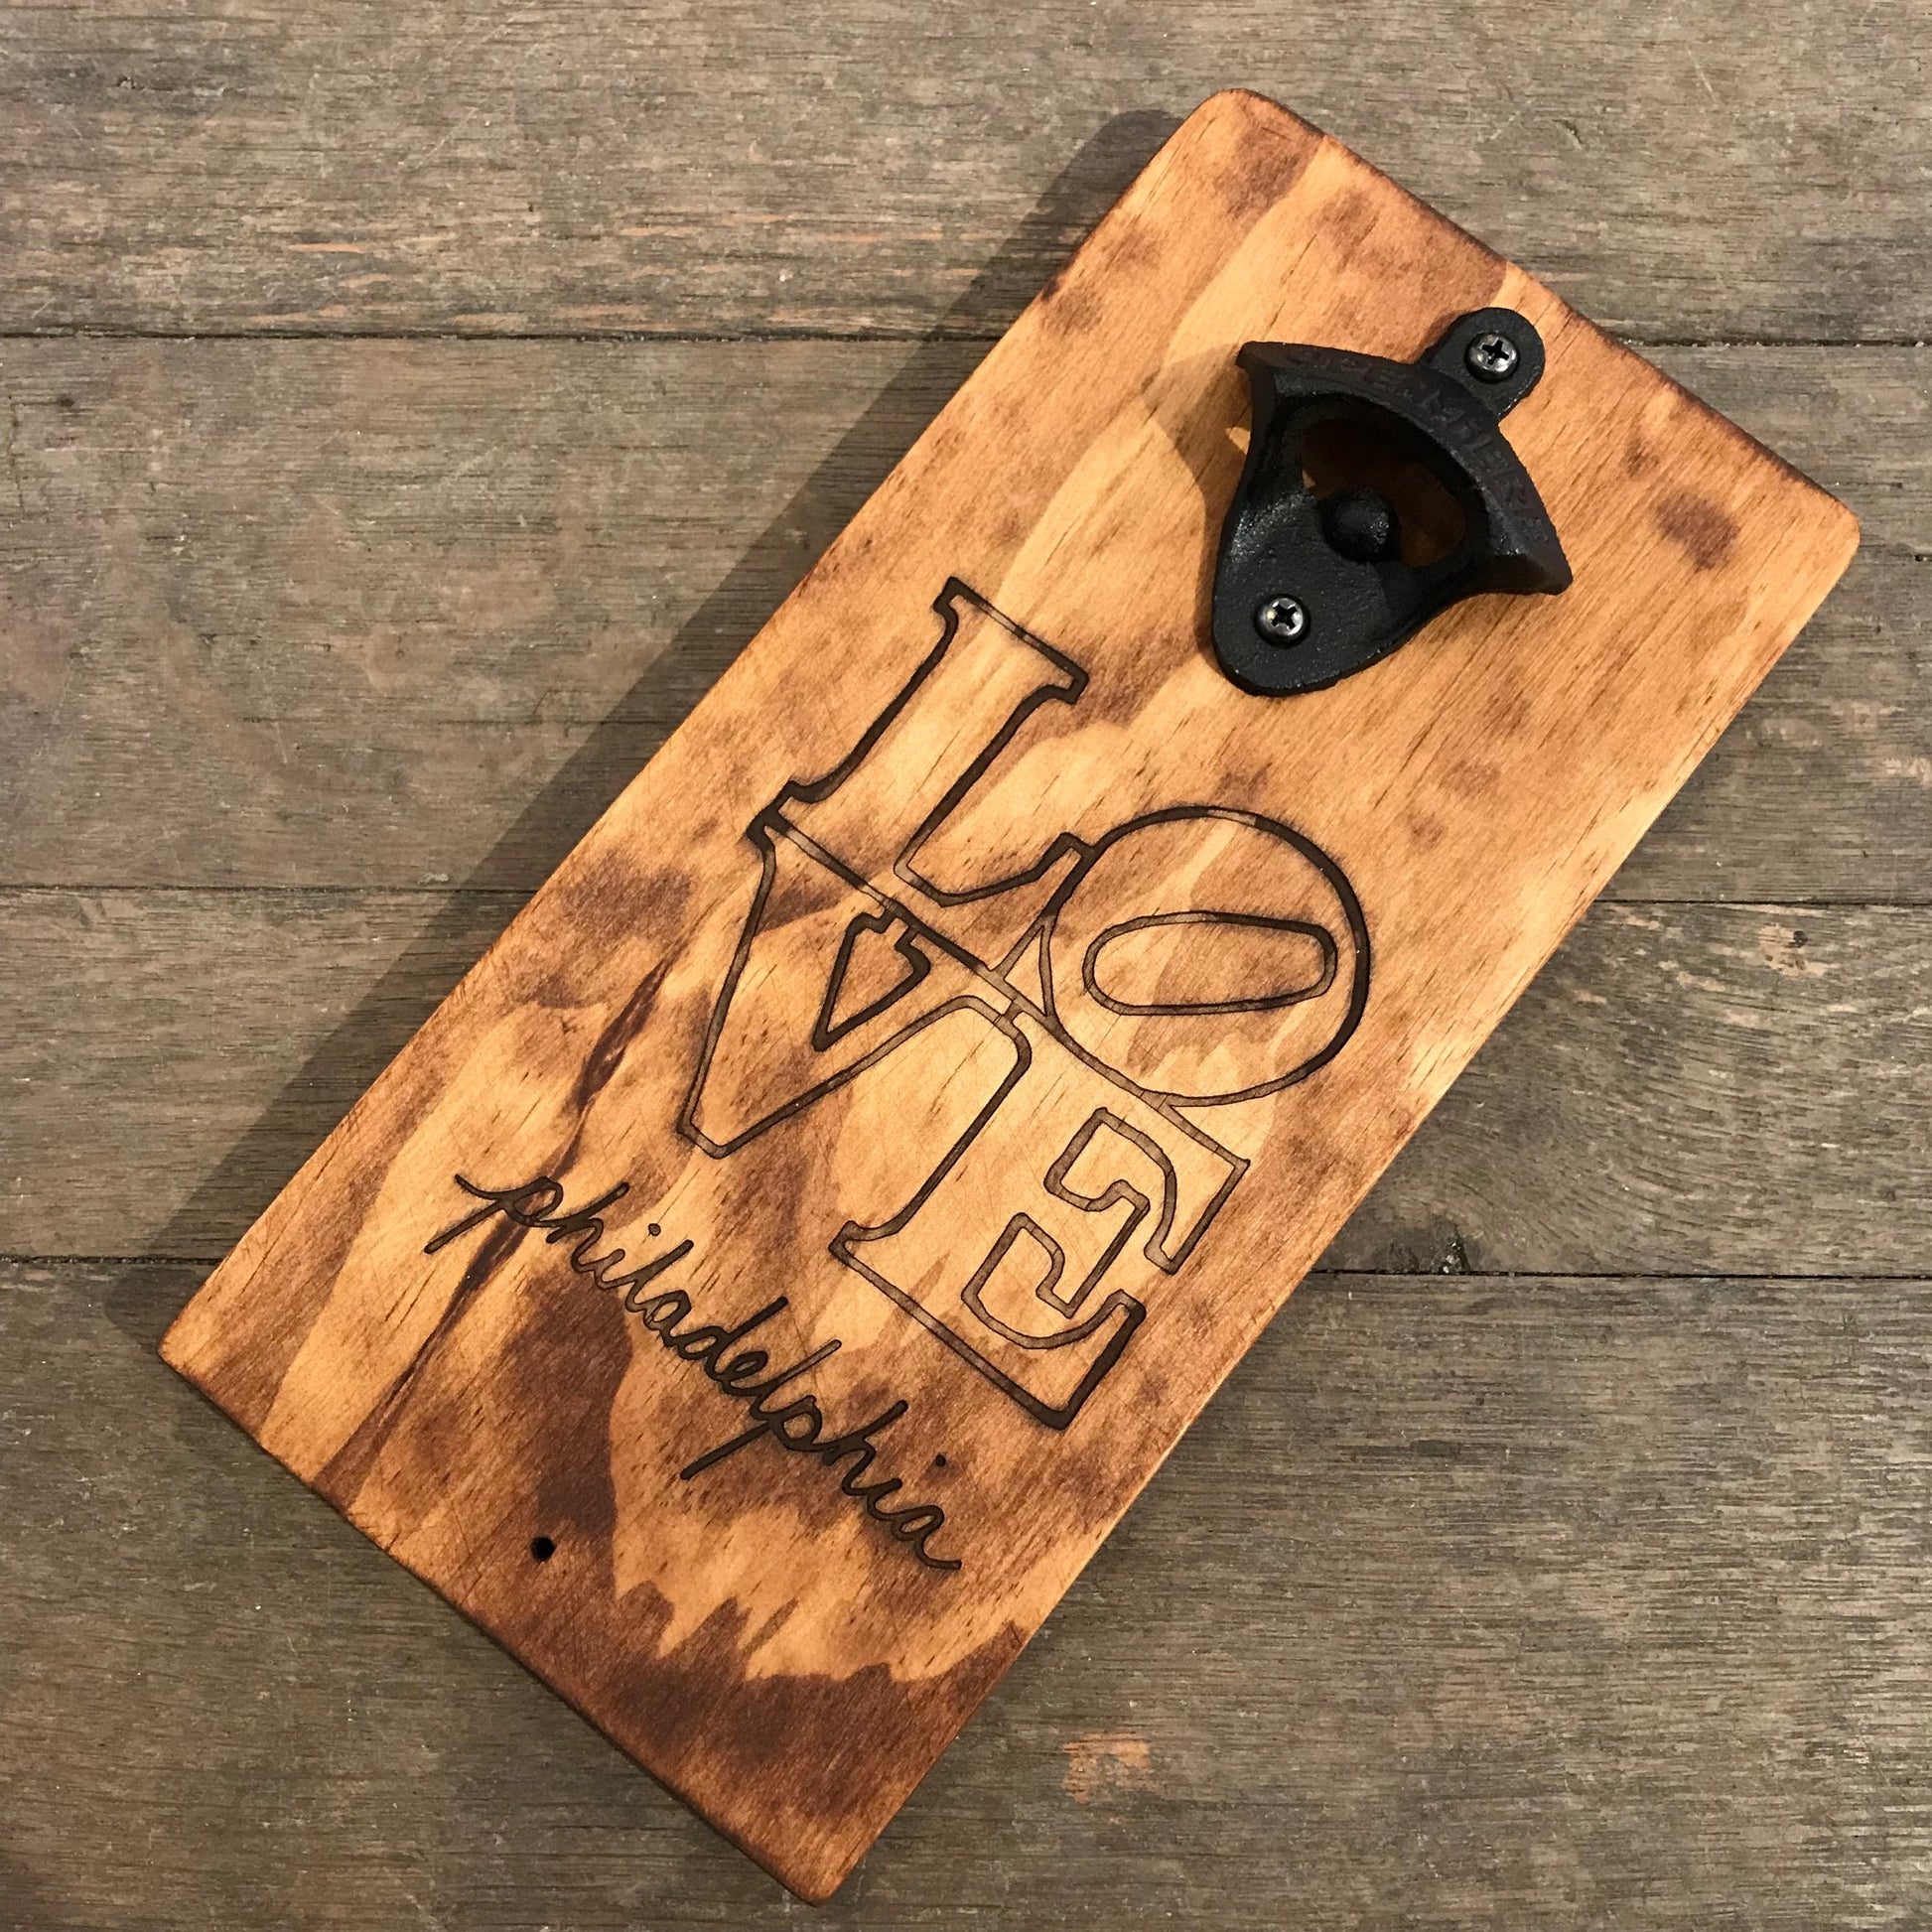 A Philly Phlights Philly Wall-Mounted Bottle Opener with a "love" design and the inscription "friendship" laser-etched into the surface, resting on a wooden floor.